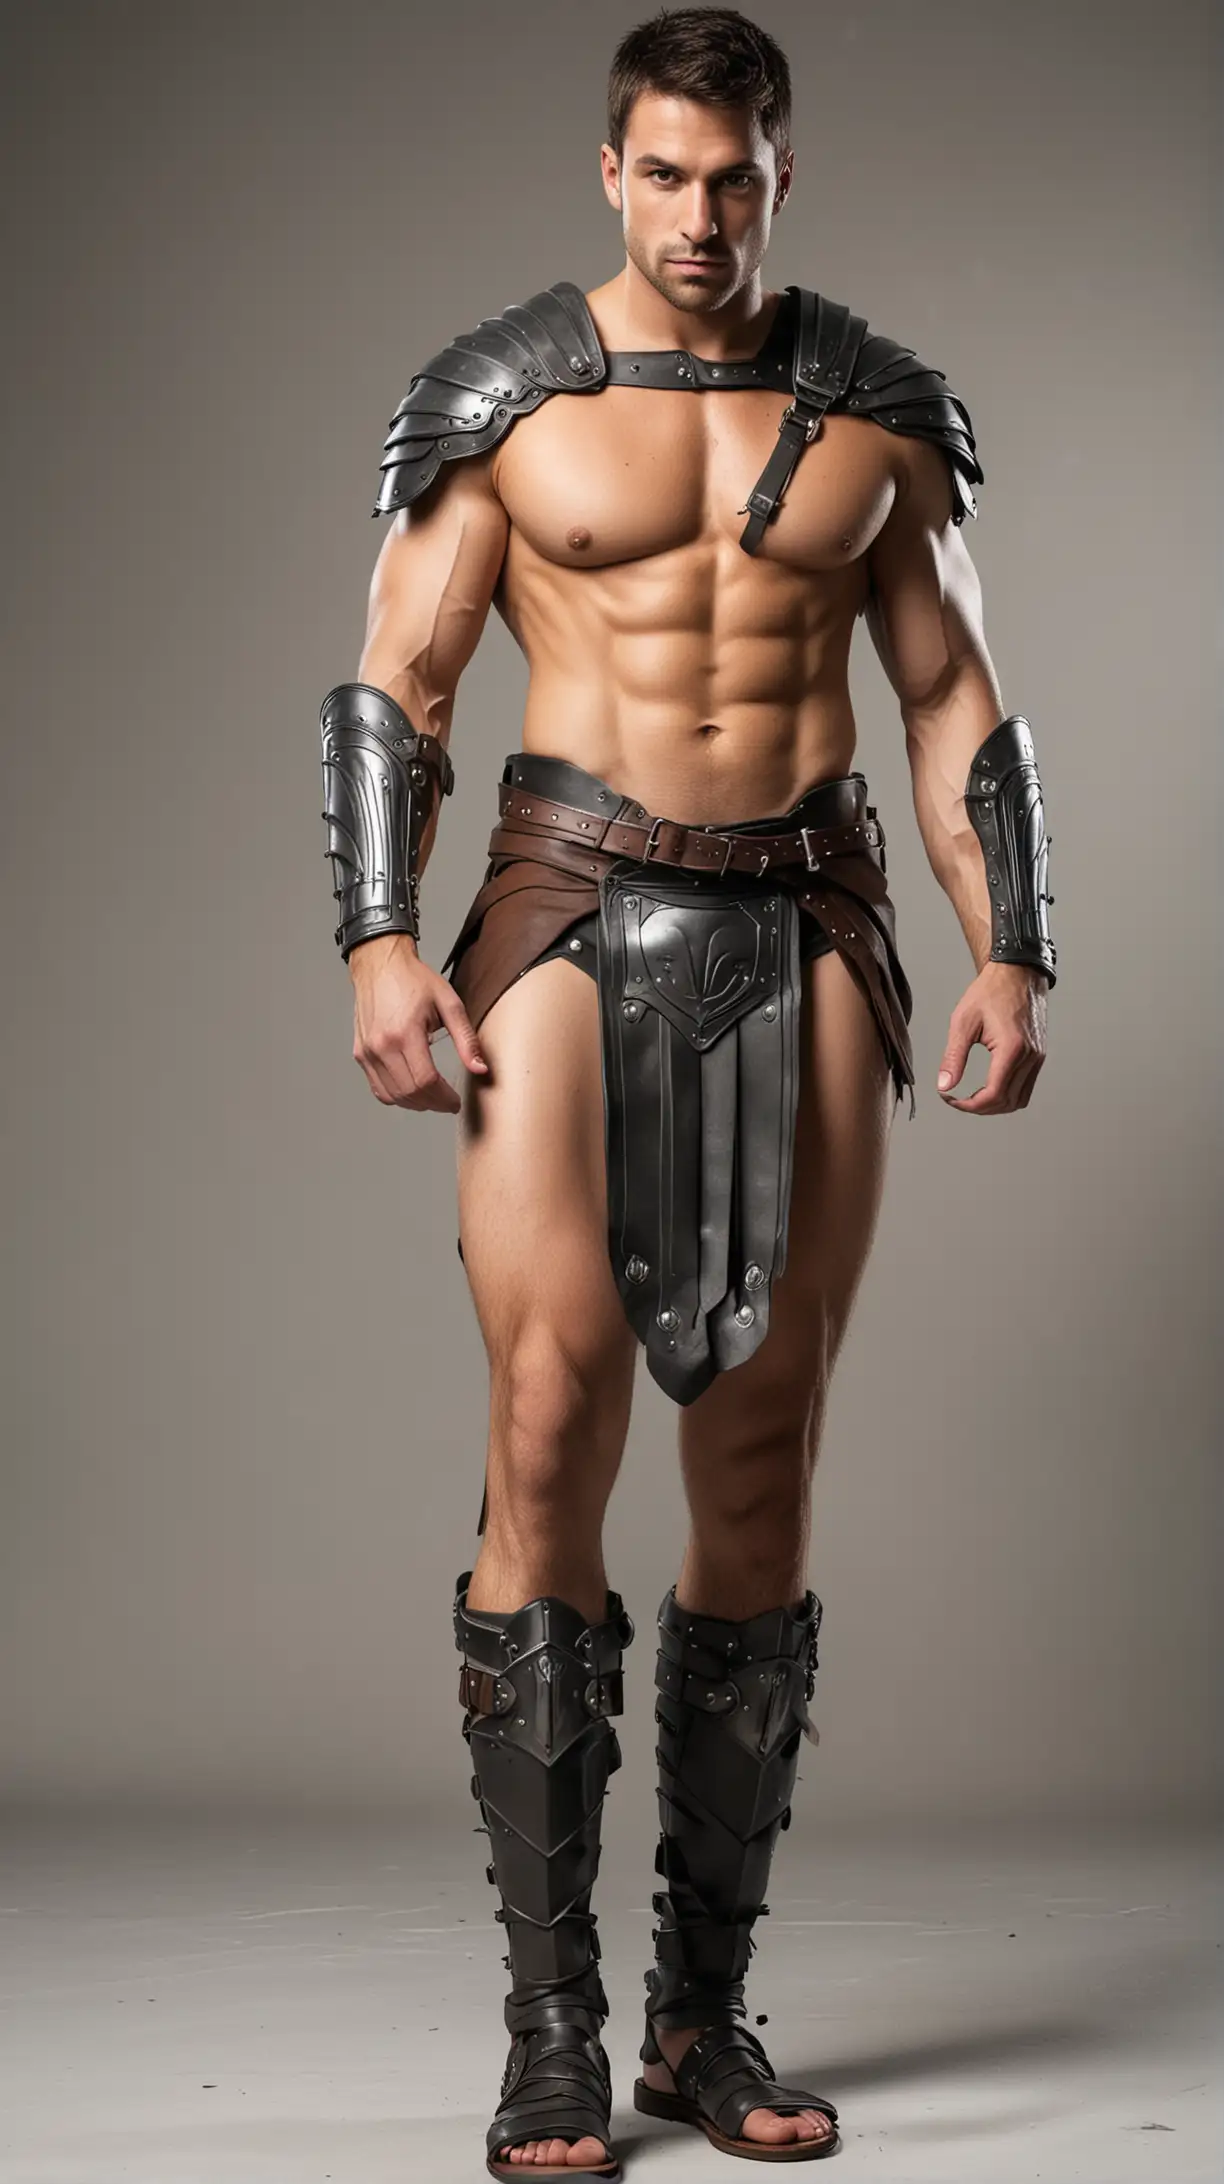 background removed, steel body armor covering his torso, muscular male Spartan warrior, sandals, bare legs, naked thighs, very short leather kilt, steel body armor covers chest area, cloak, cleanshaven